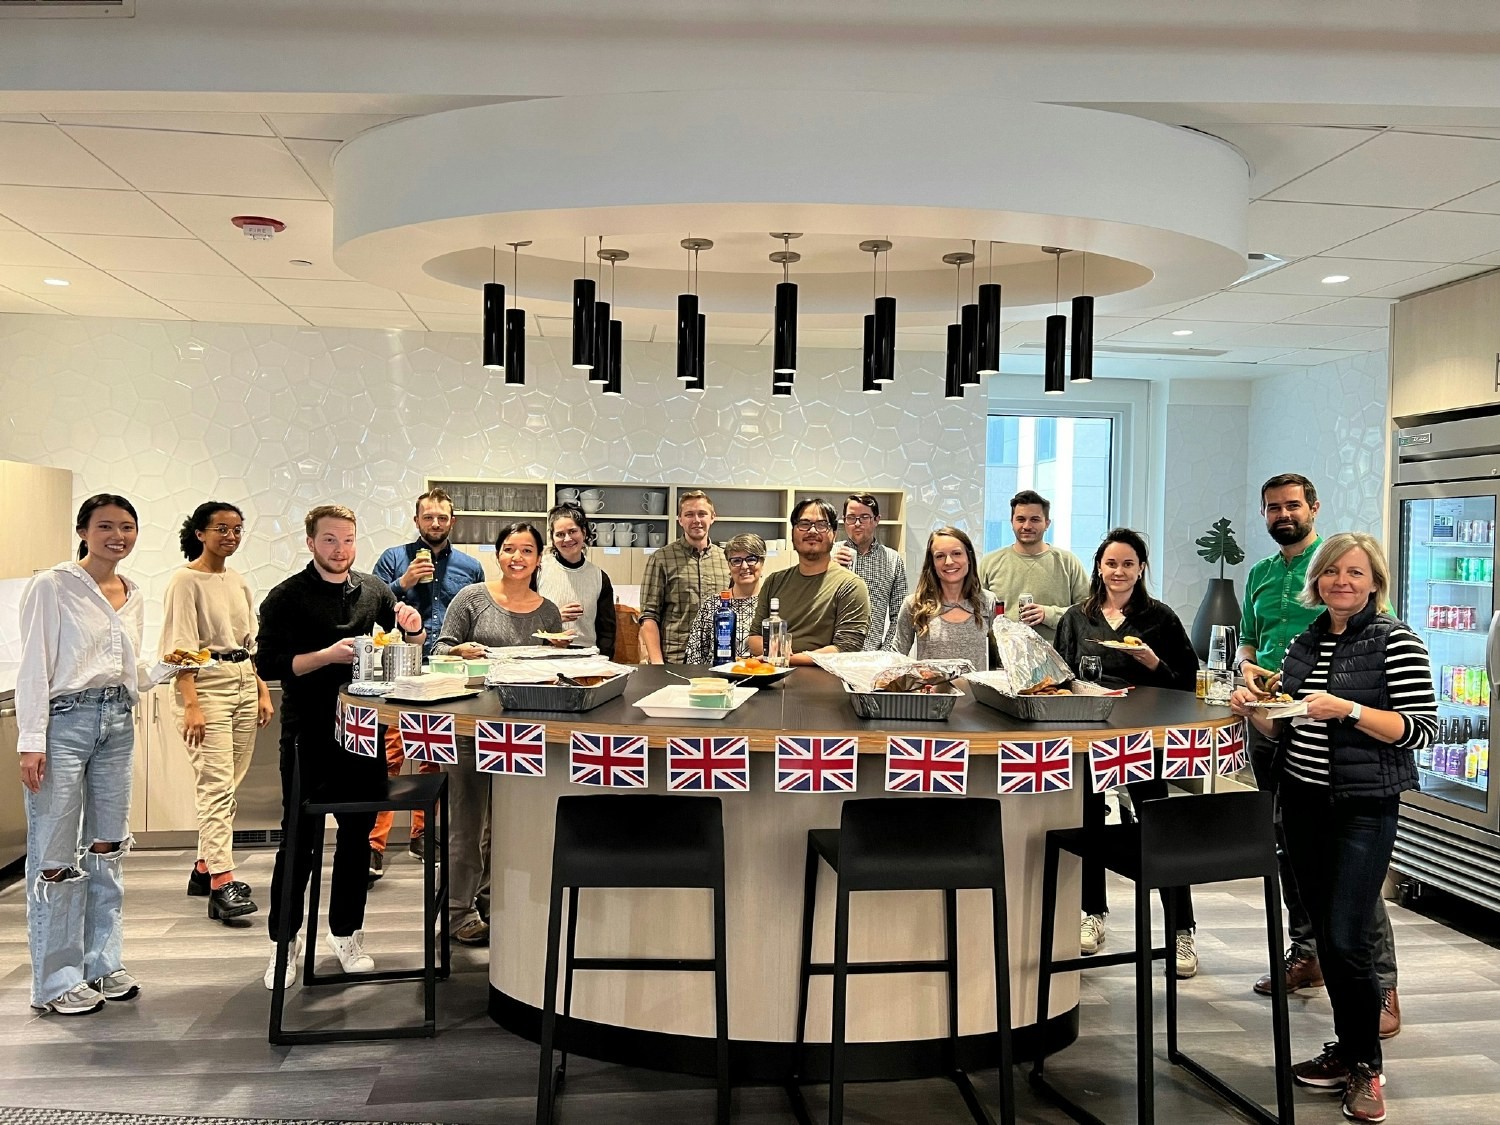 Our London office celebrates their 5-year anniversary!